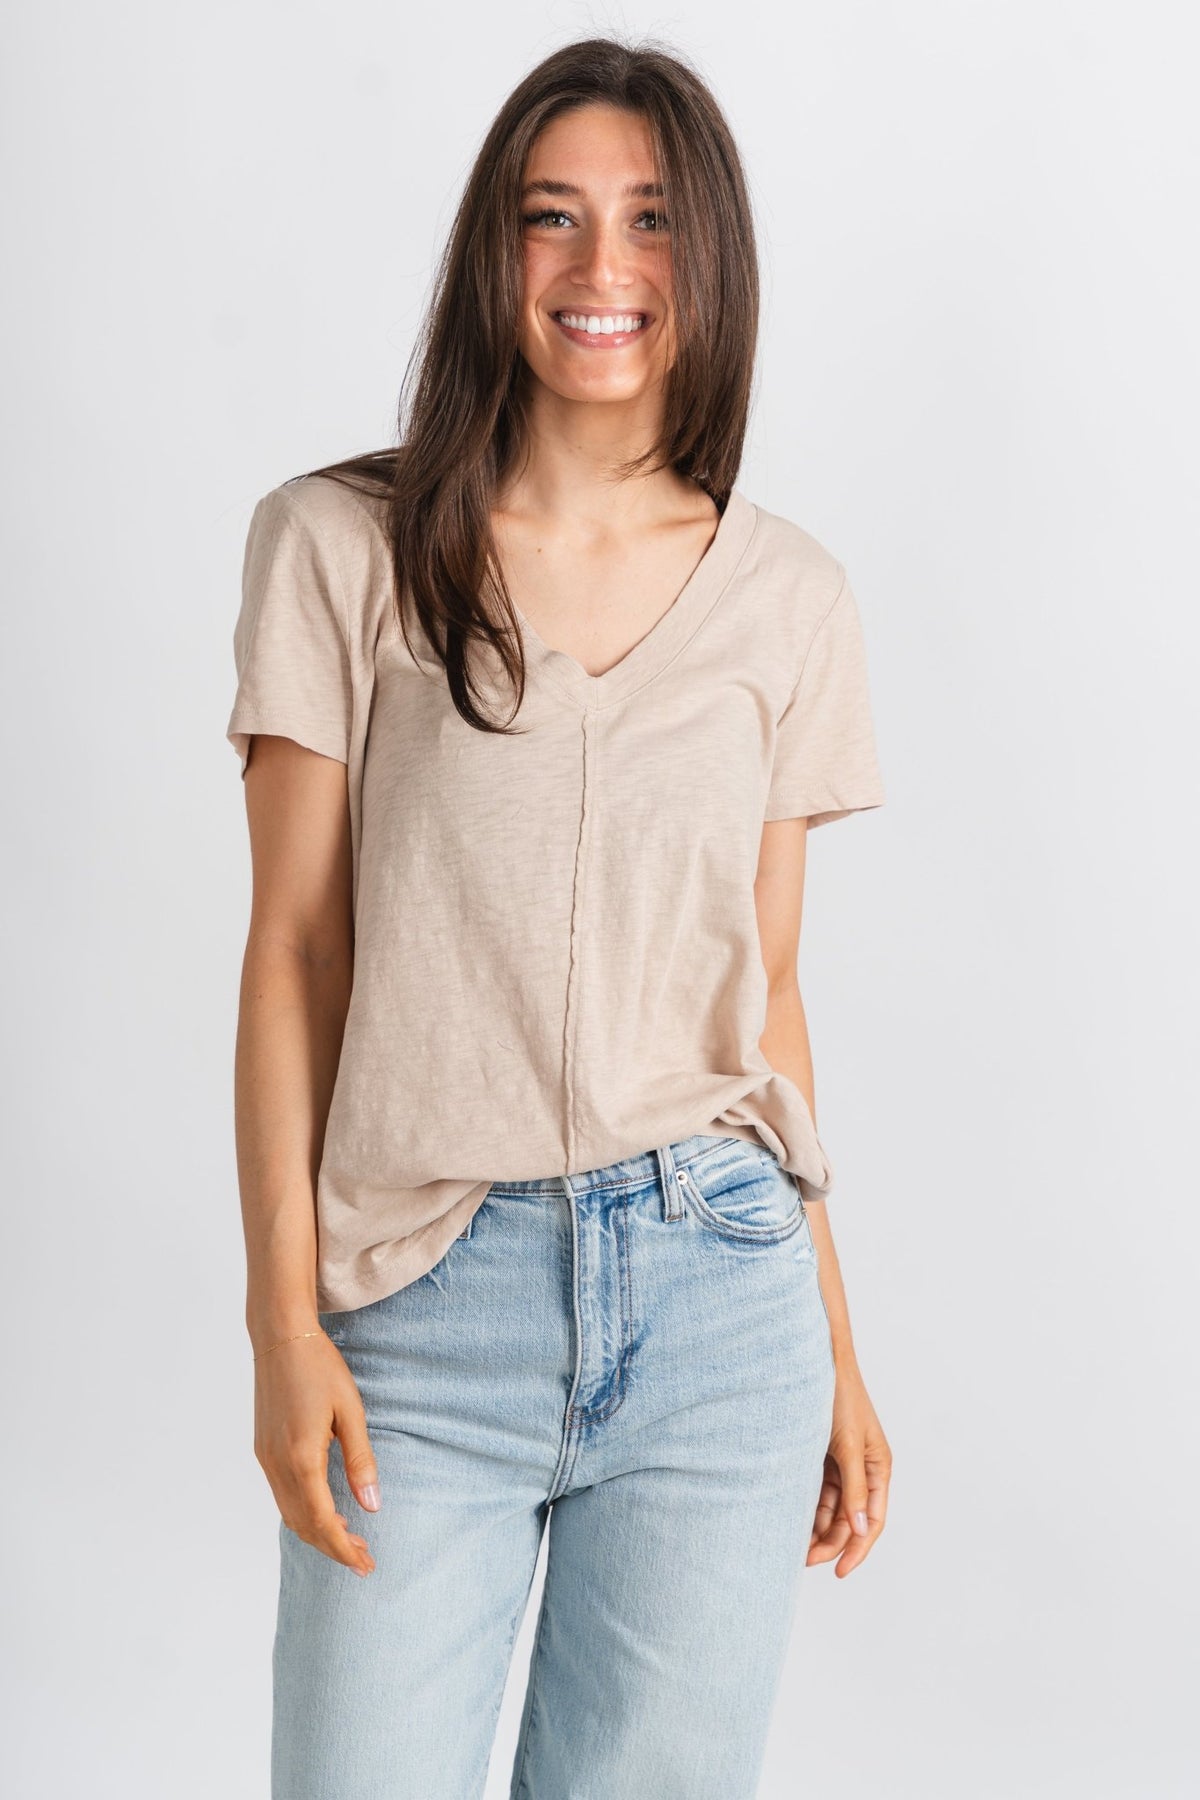 Z Supply Asher v-neck tee putty - Z Supply T-shirts - Z Supply Tops, Dresses, Tanks, Tees, Cardigans, Joggers and Loungewear at Lush Fashion Lounge